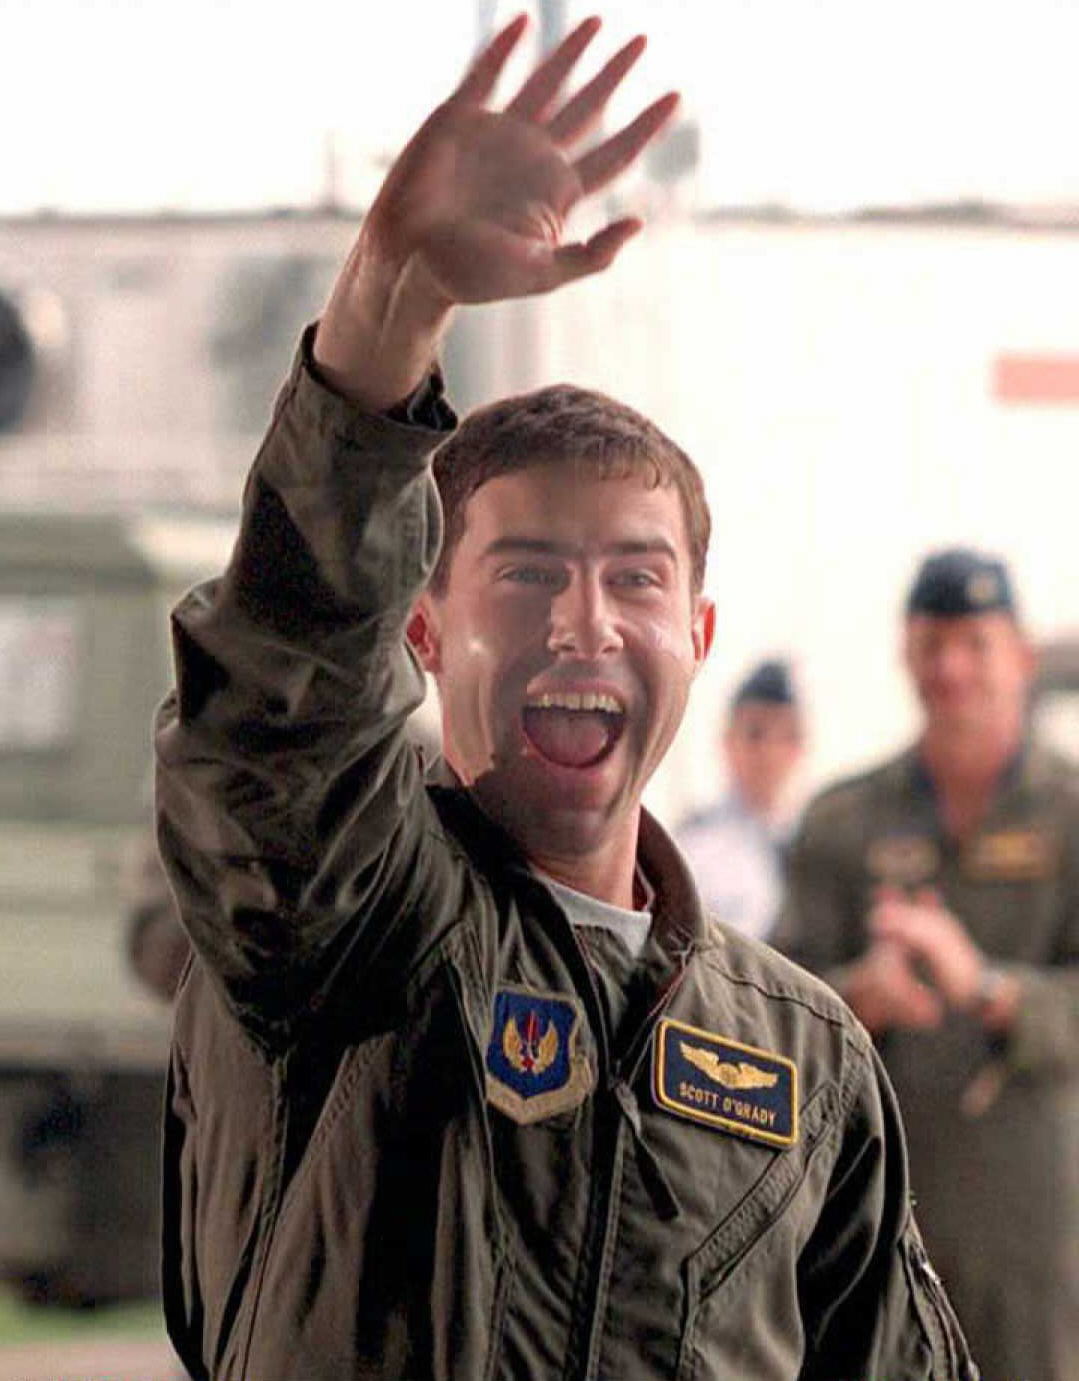 Scott O'Grady arrives at the U.S. Airbase in Aviano, Italy, on June 9, 1995, following his rescue from Bosnian Serb territory. | Source: Getty Images